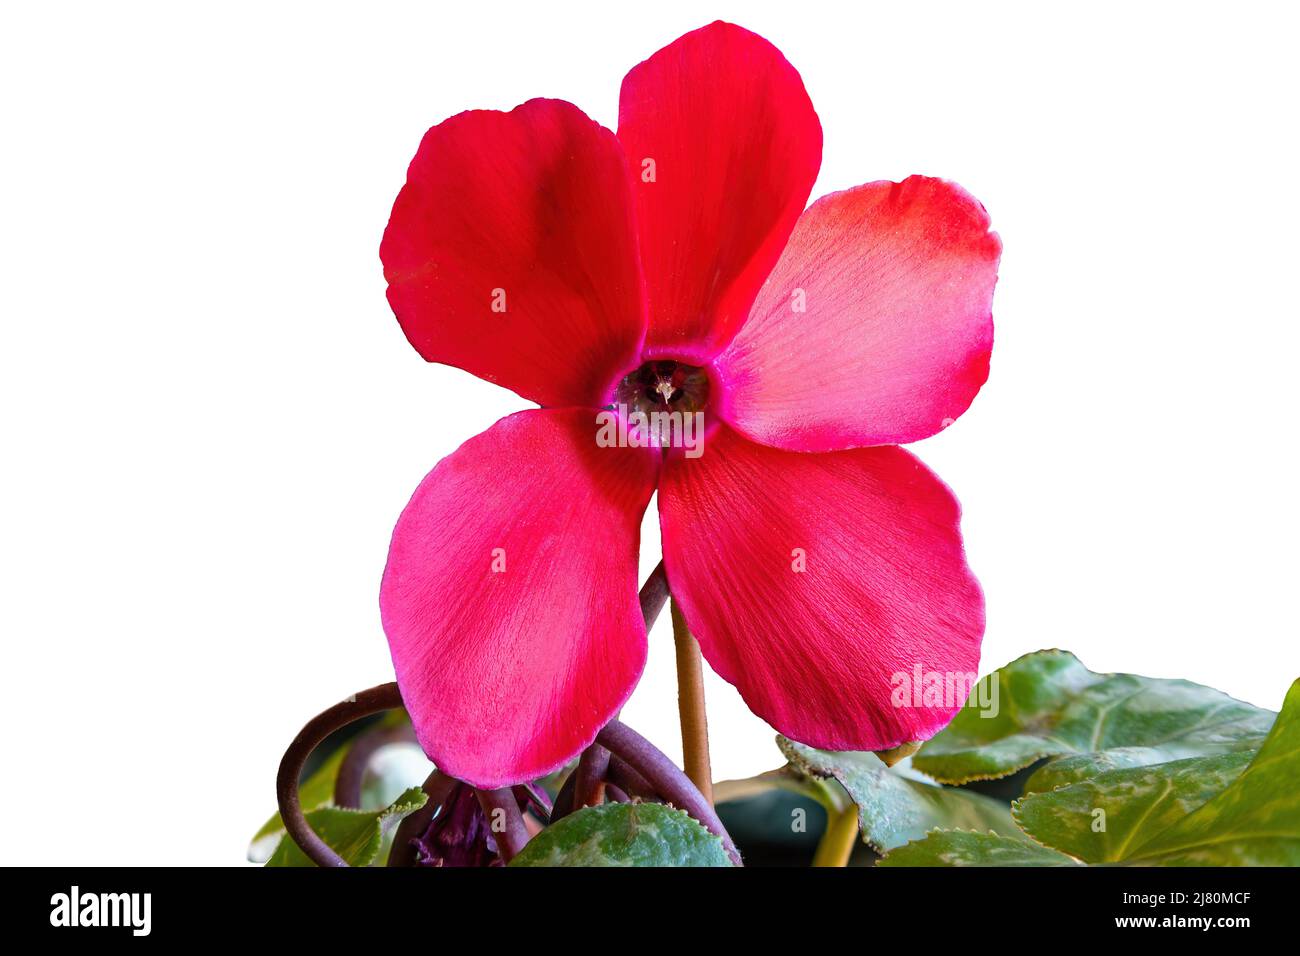 Red flower of Cyclamen persicum mill, Alpine violet or the Persian cyclamen, is a species of flowering herbaceous perennial plant growing from a tuber Stock Photo